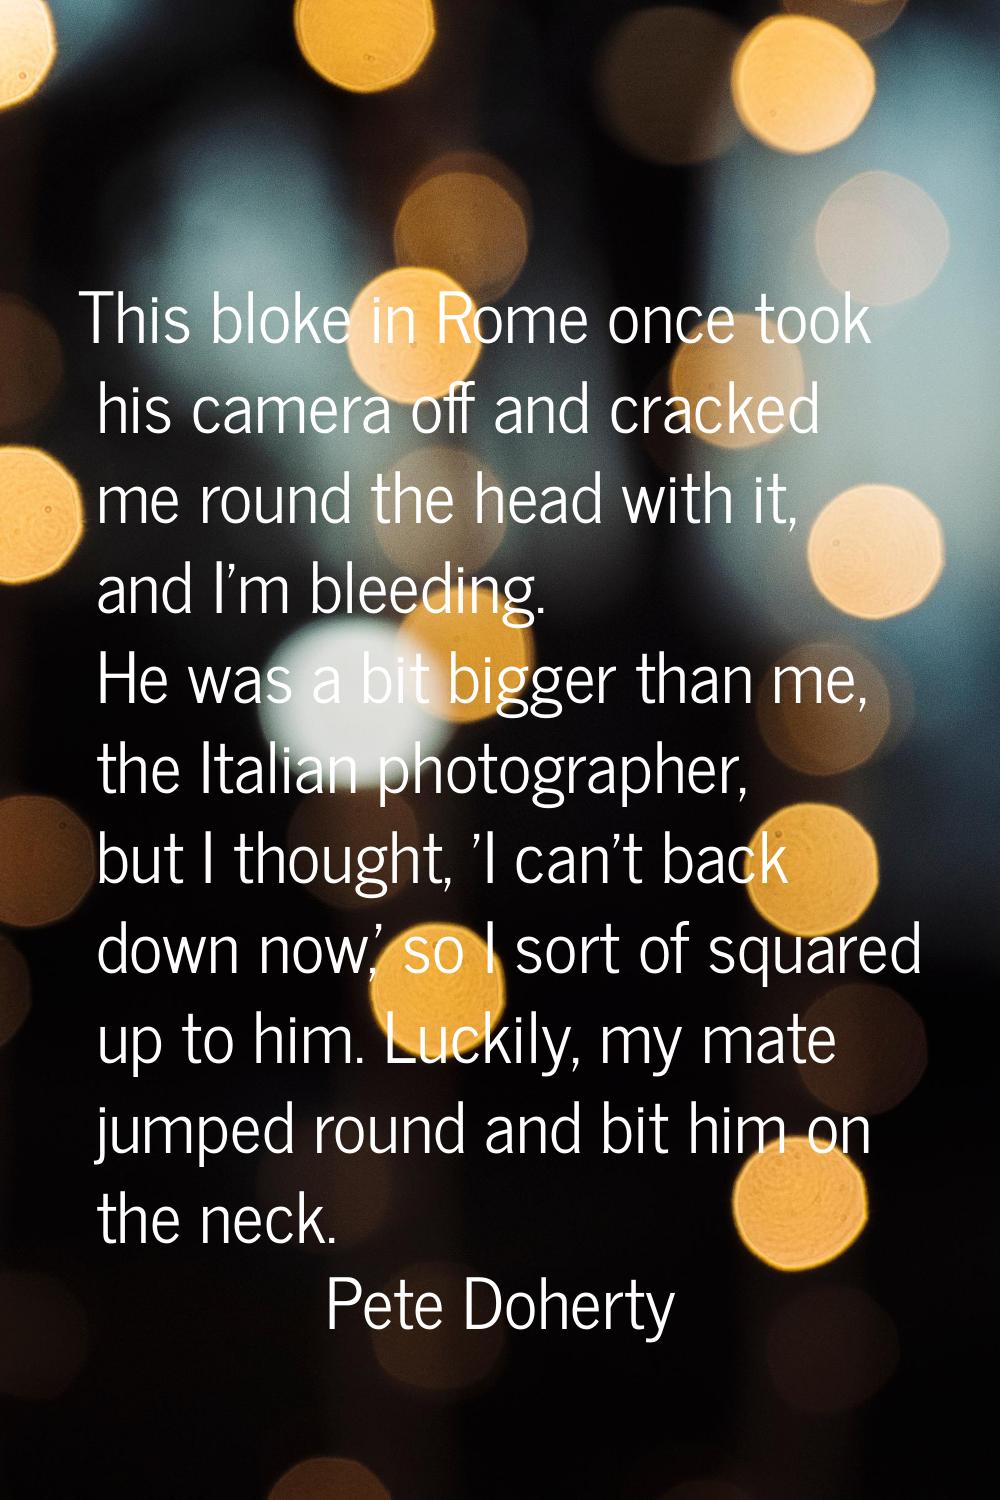 This bloke in Rome once took his camera off and cracked me round the head with it, and I'm bleeding